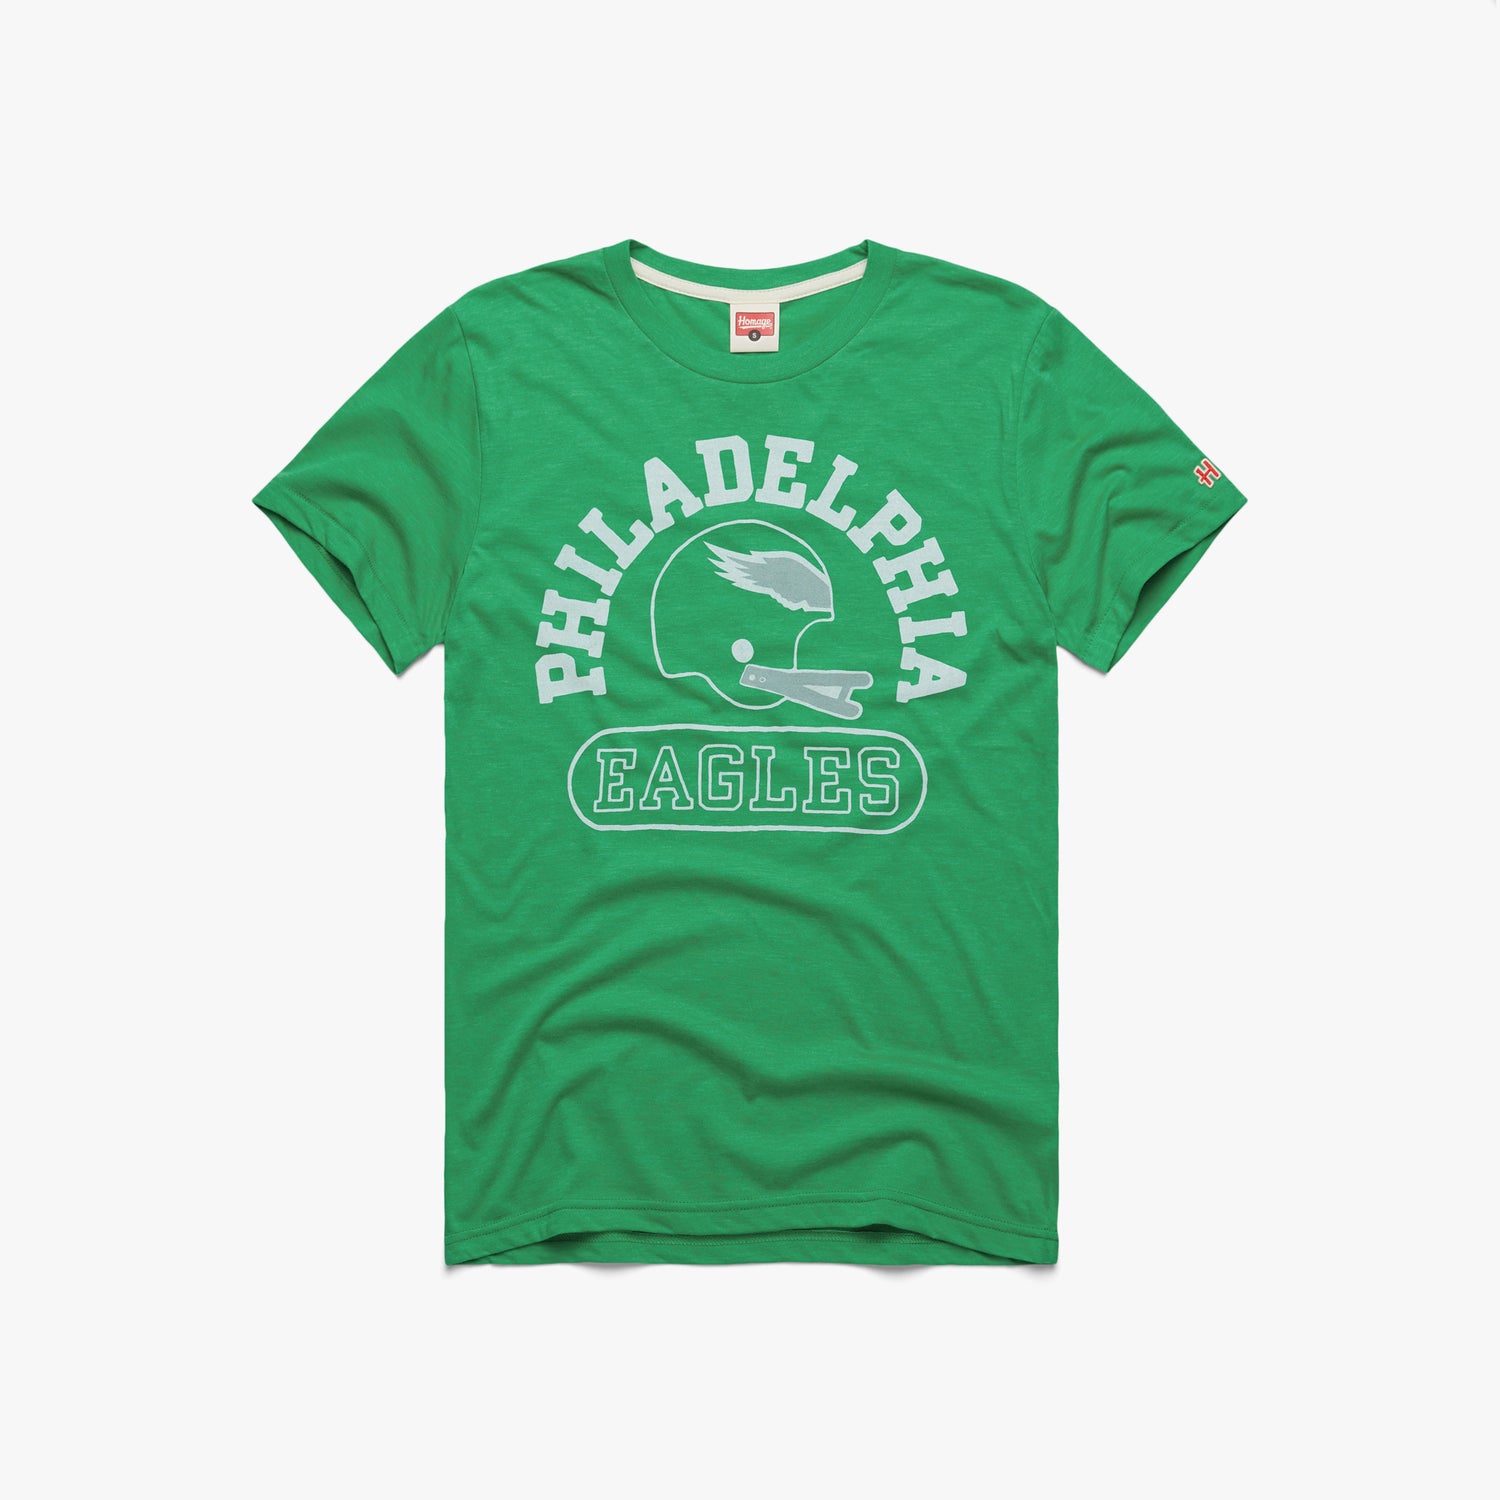 Philadelphia Eagles Throwback Helmet T-Shirt | Kelly Green Eagles Apparel from Homage. | Officially Licensed NFL Apparel from Homage Pro Shop.